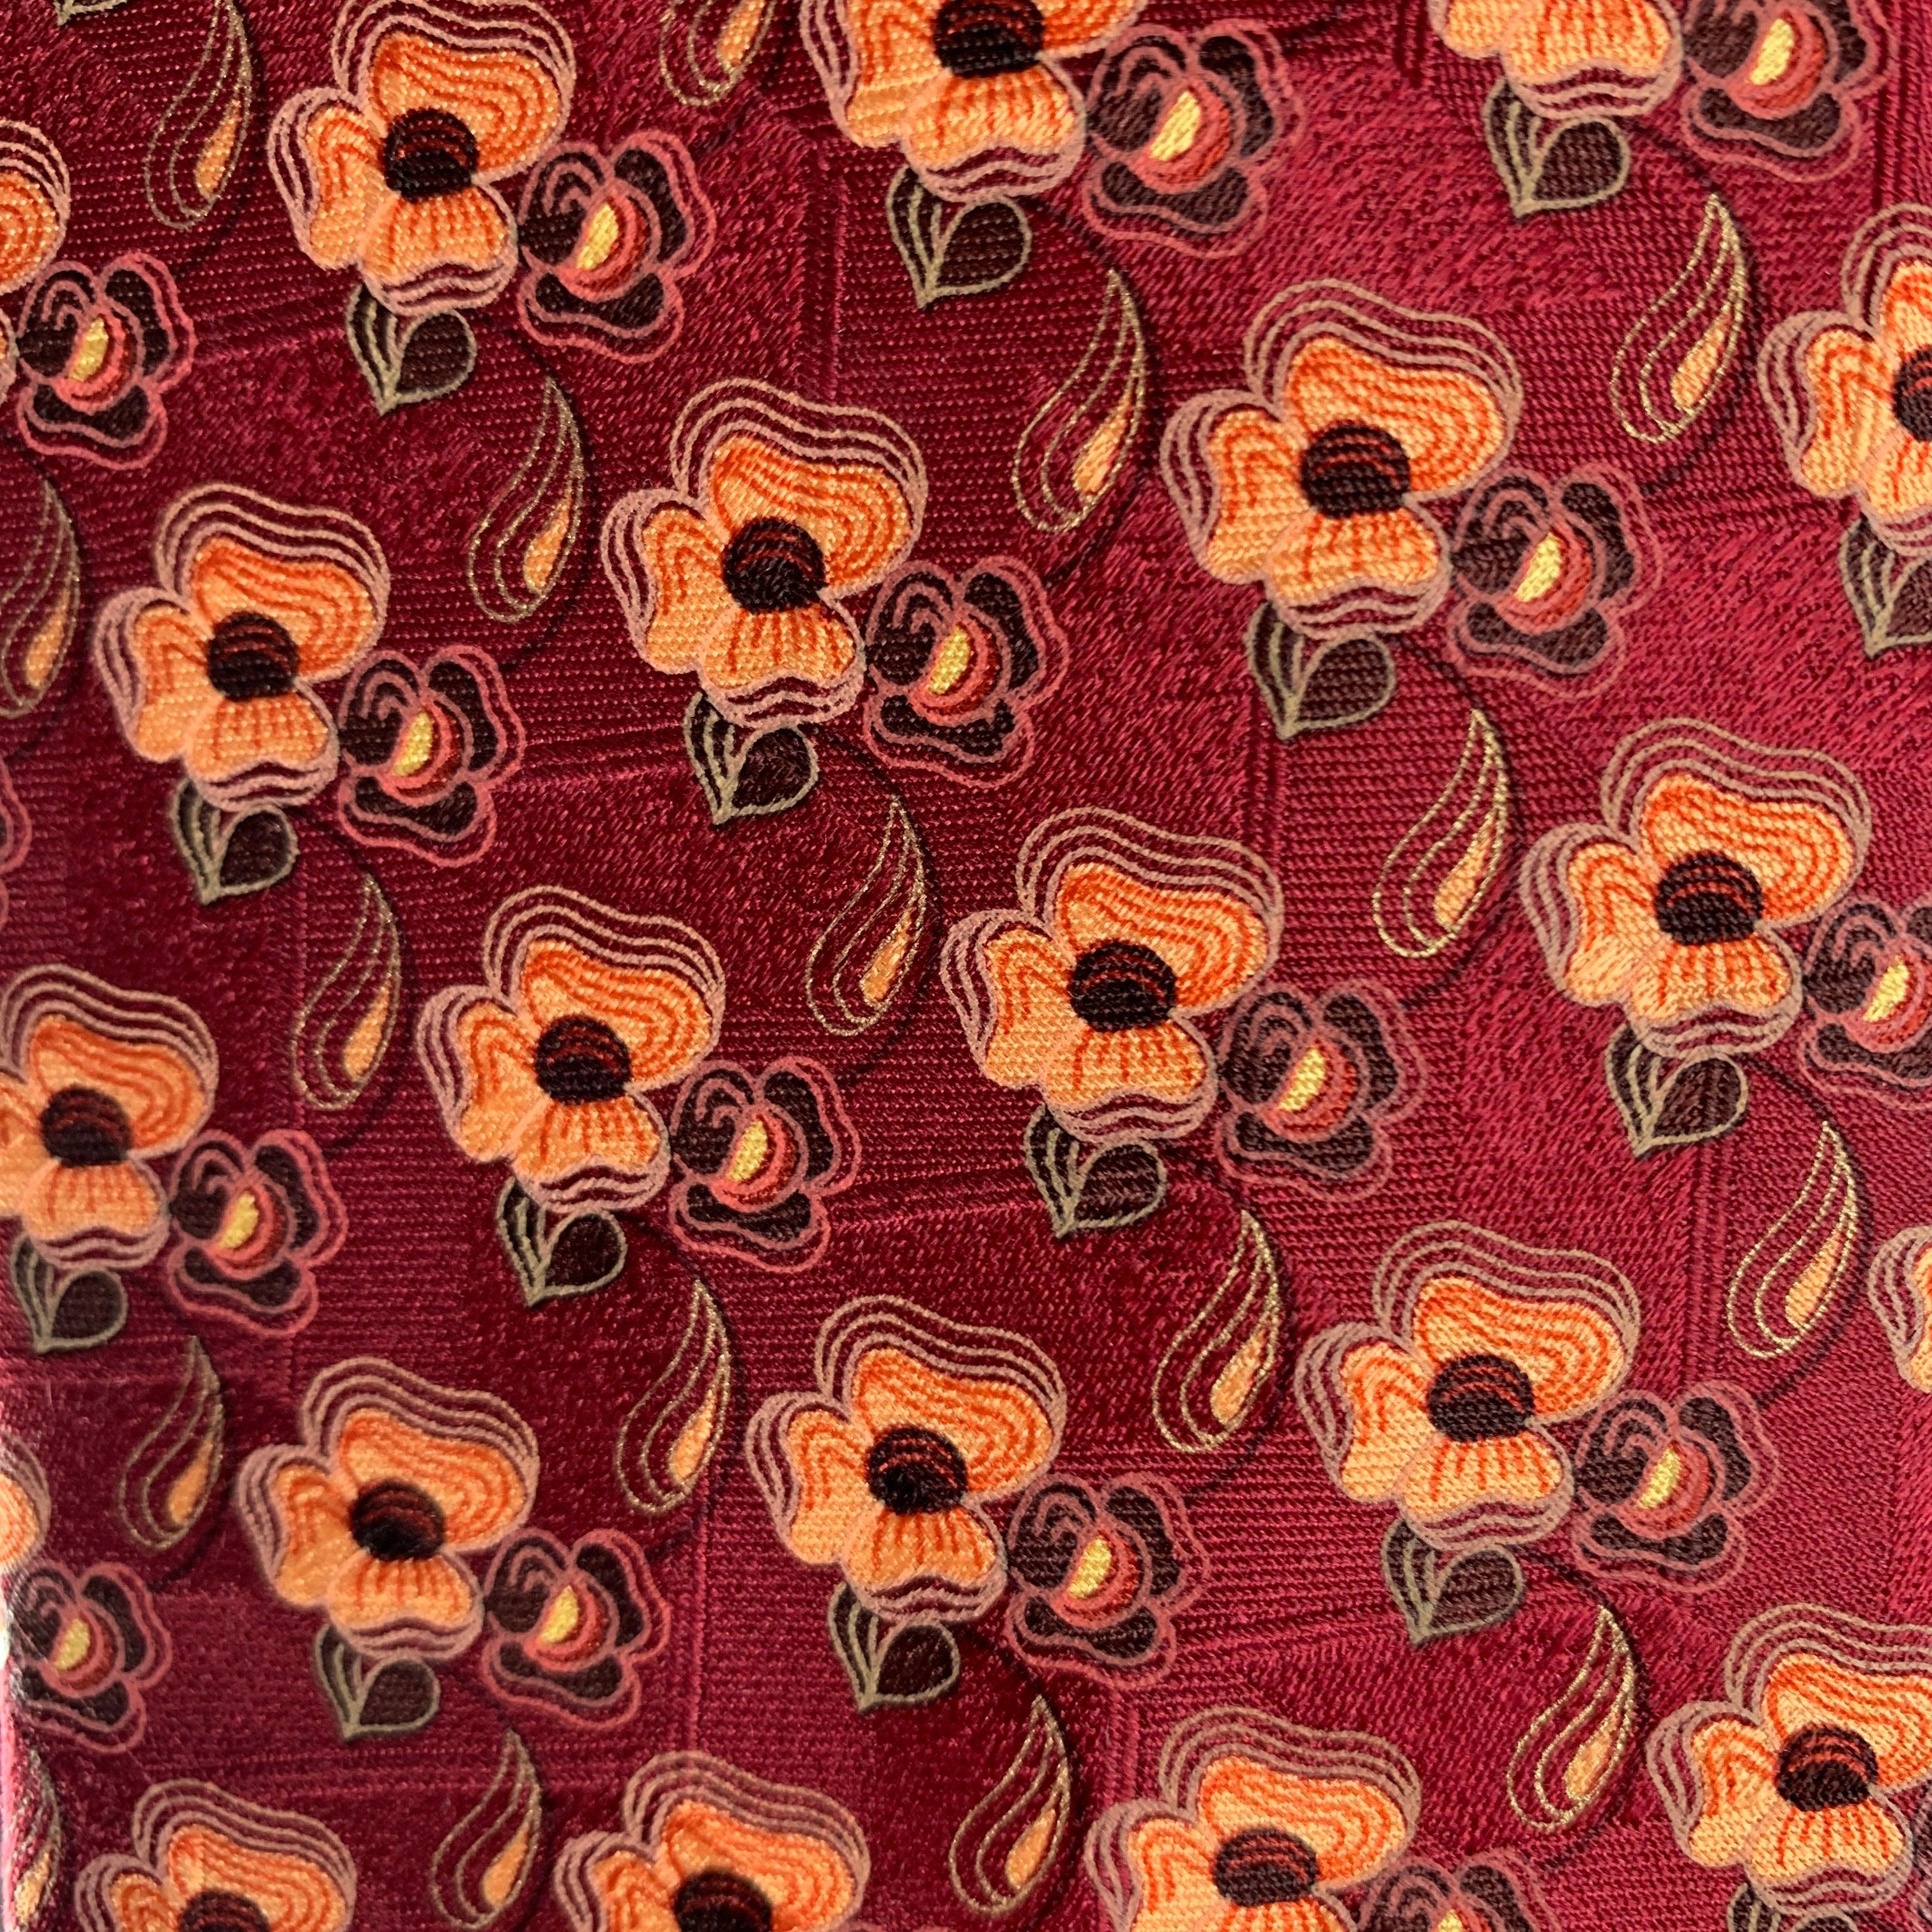 ERMENEGILDO ZEGNA necktie comes in burgundy featuring an orange floral pattern. 100% silk. Made in Italy.
Very Good Pre-Owned Condition.
 

Measurements: 
  Width: 3 inches Length: 58 inches 


  
  
 
Reference: 124771
Category: Tie
More Details
  